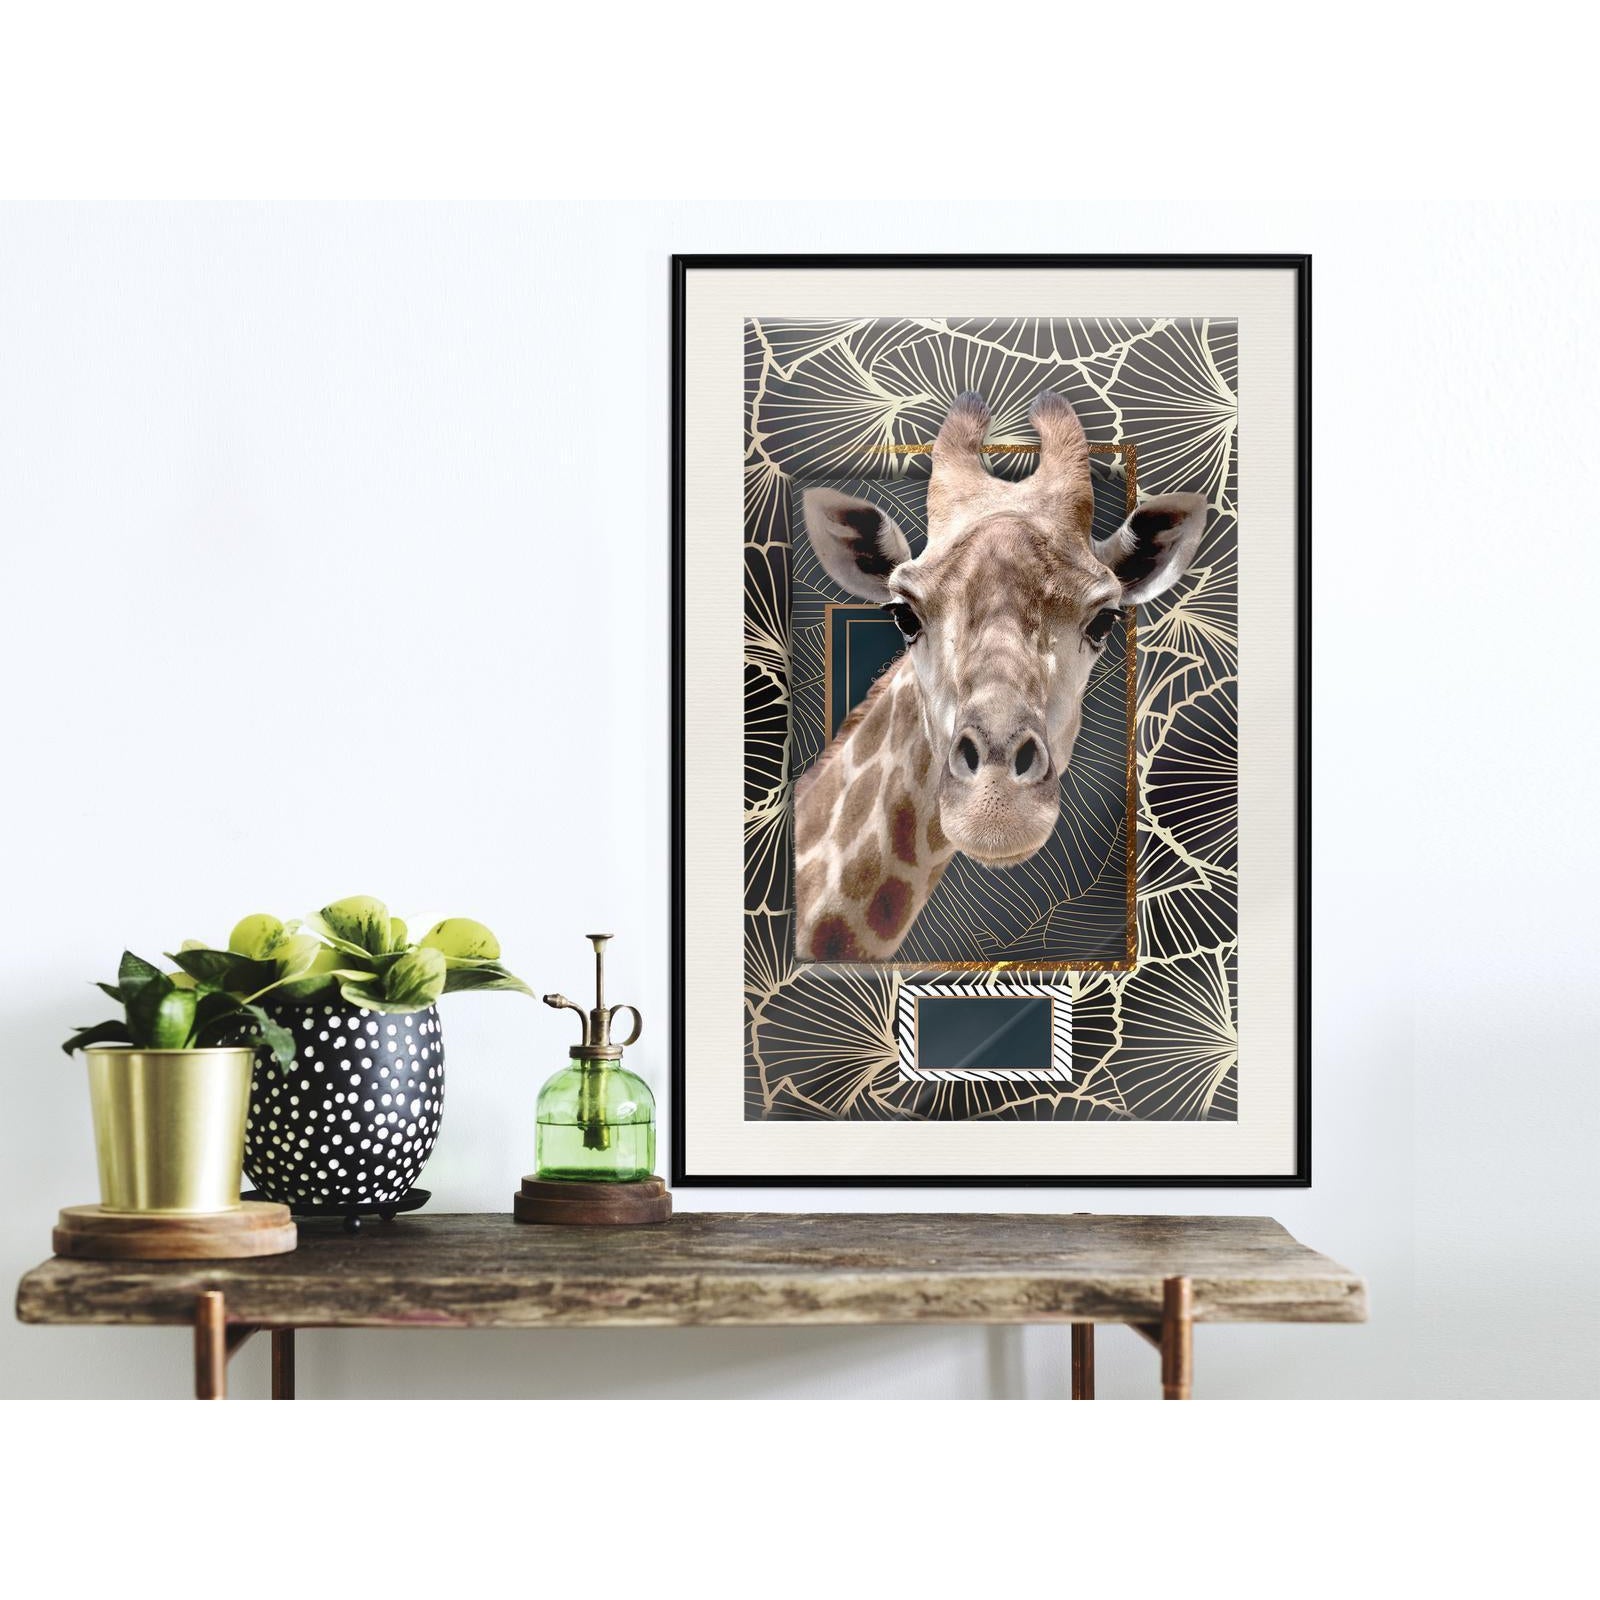 Inramad Poster / Tavla - Giraffe in the Frame-Poster Inramad-Artgeist-peaceofhome.se